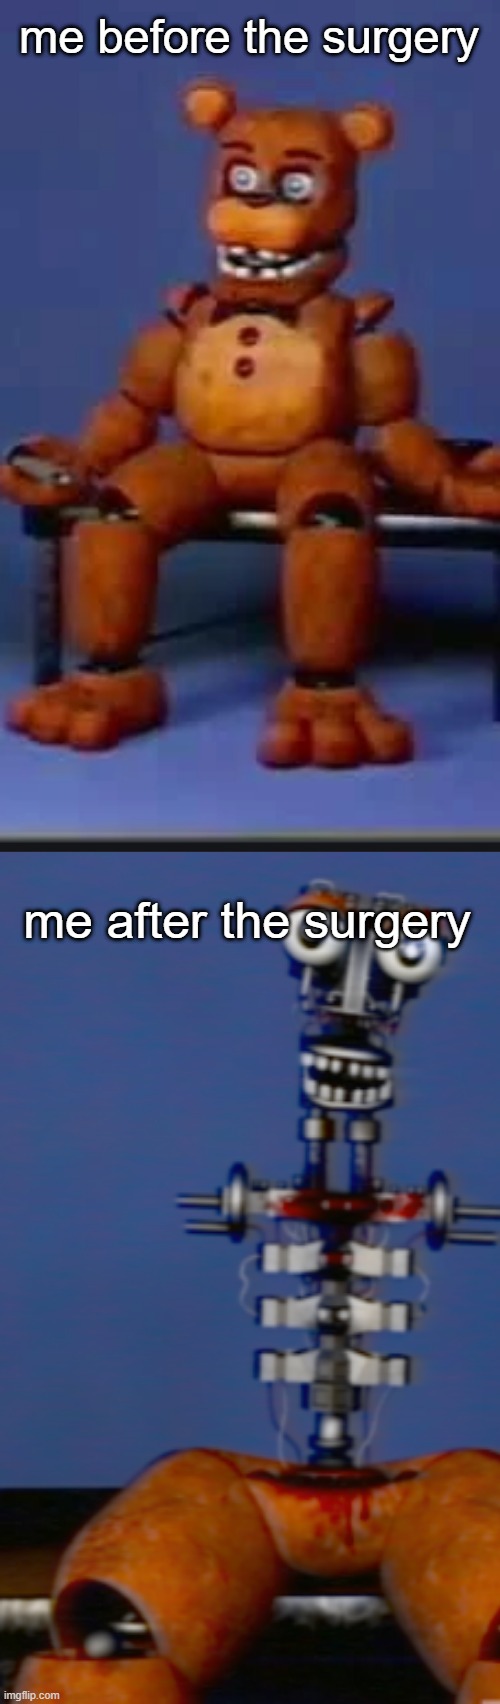 very violent | me before the surgery; me after the surgery | image tagged in memes,fnaf,vhs | made w/ Imgflip meme maker